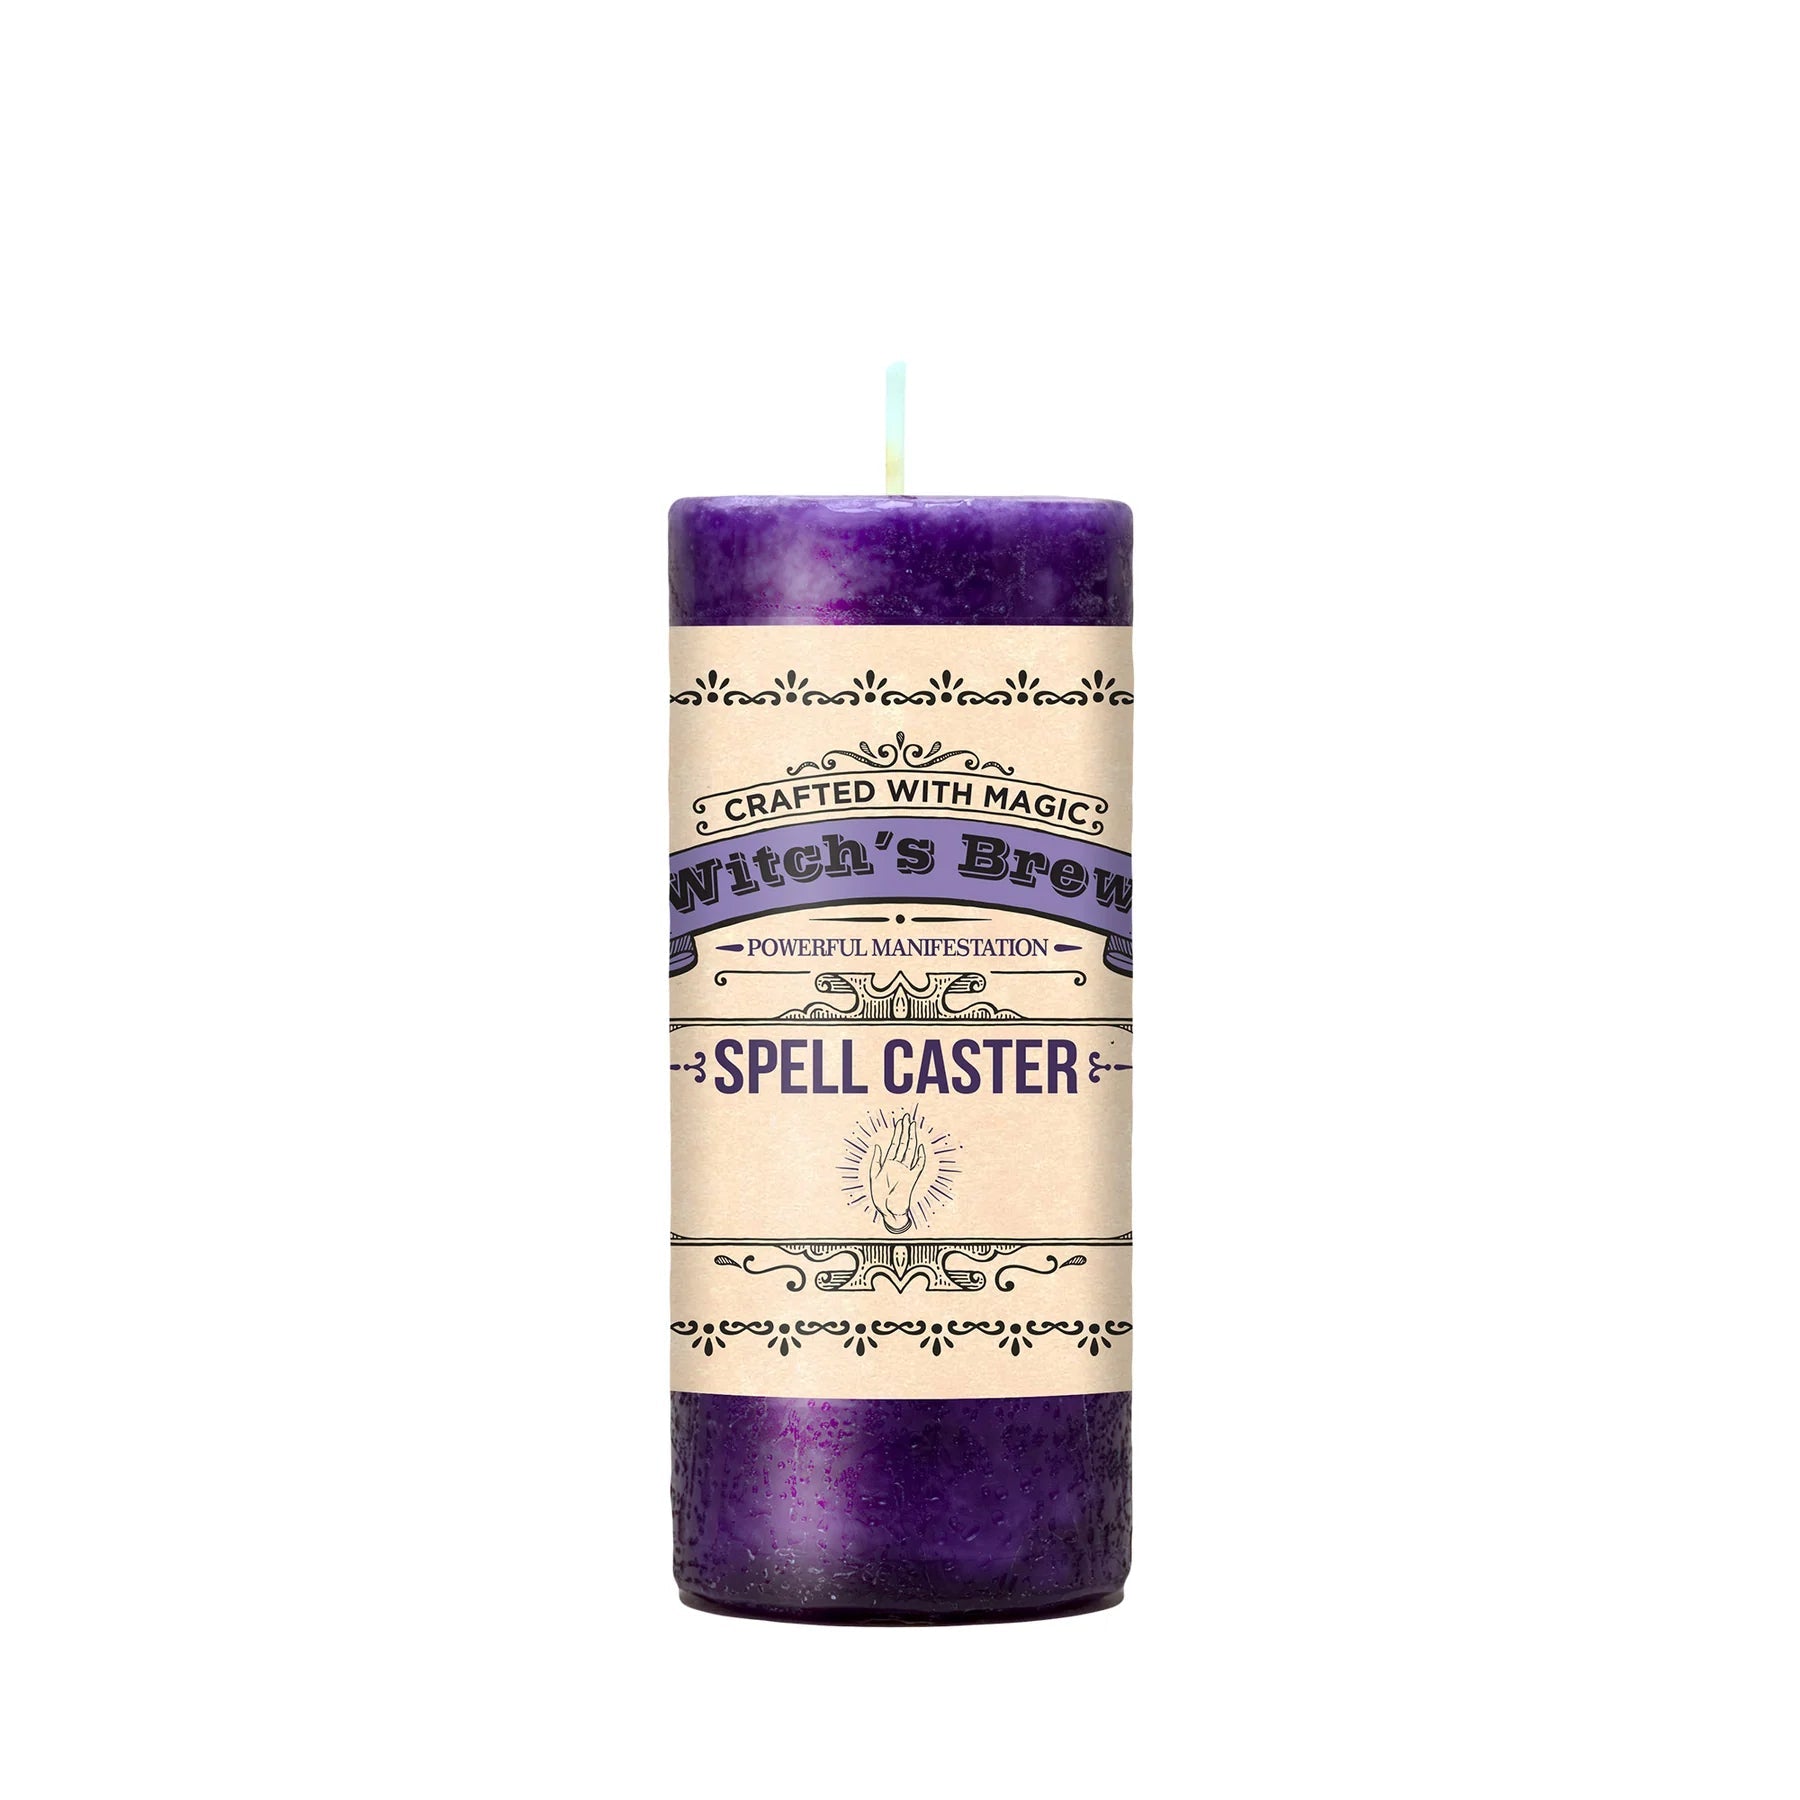 Spell Caster Candle - 13 Moons